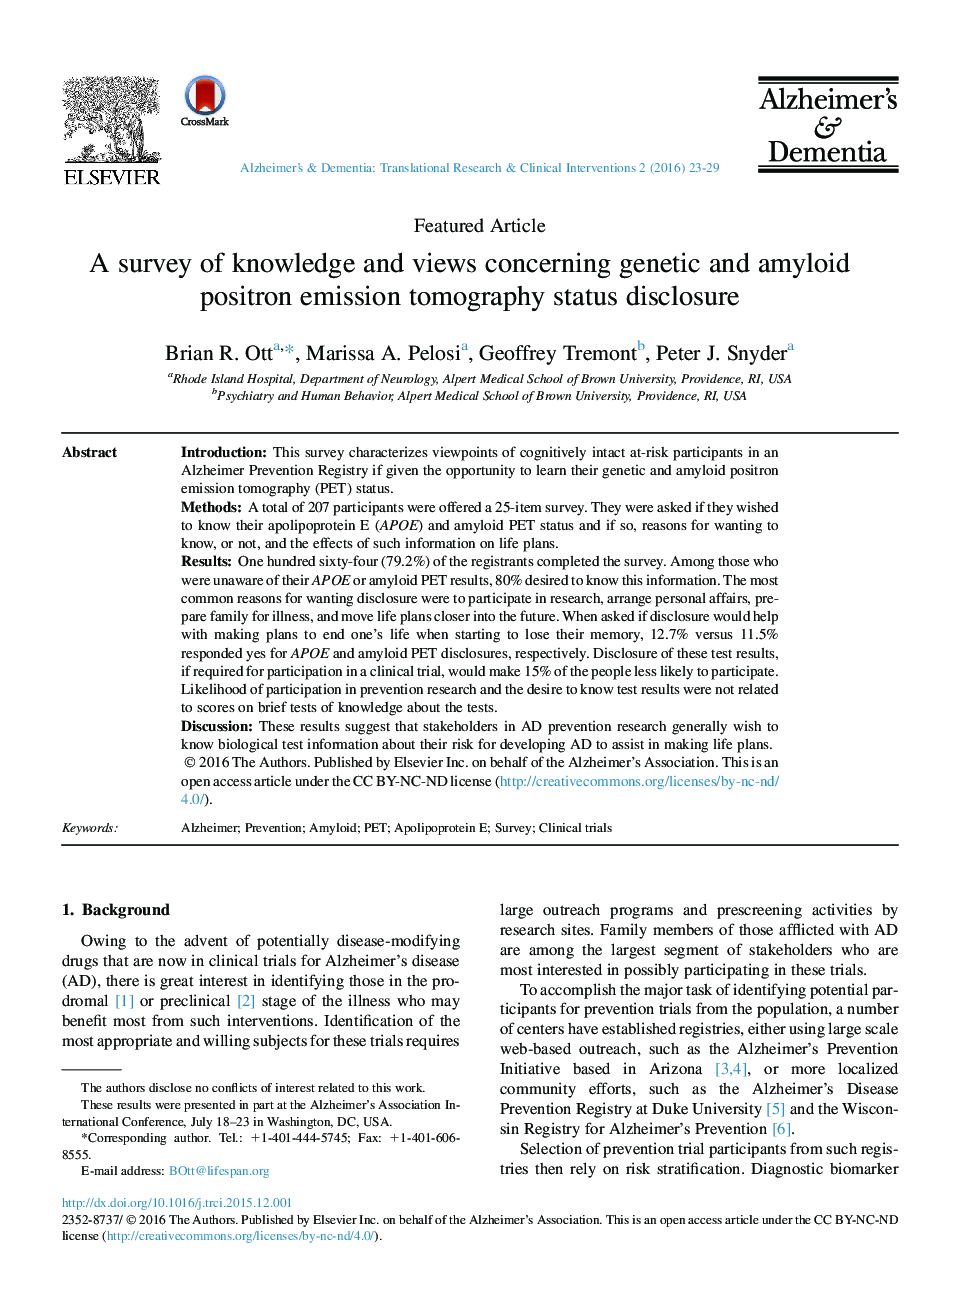 A survey of knowledge and views concerning genetic and amyloid positron emission tomography status disclosure 